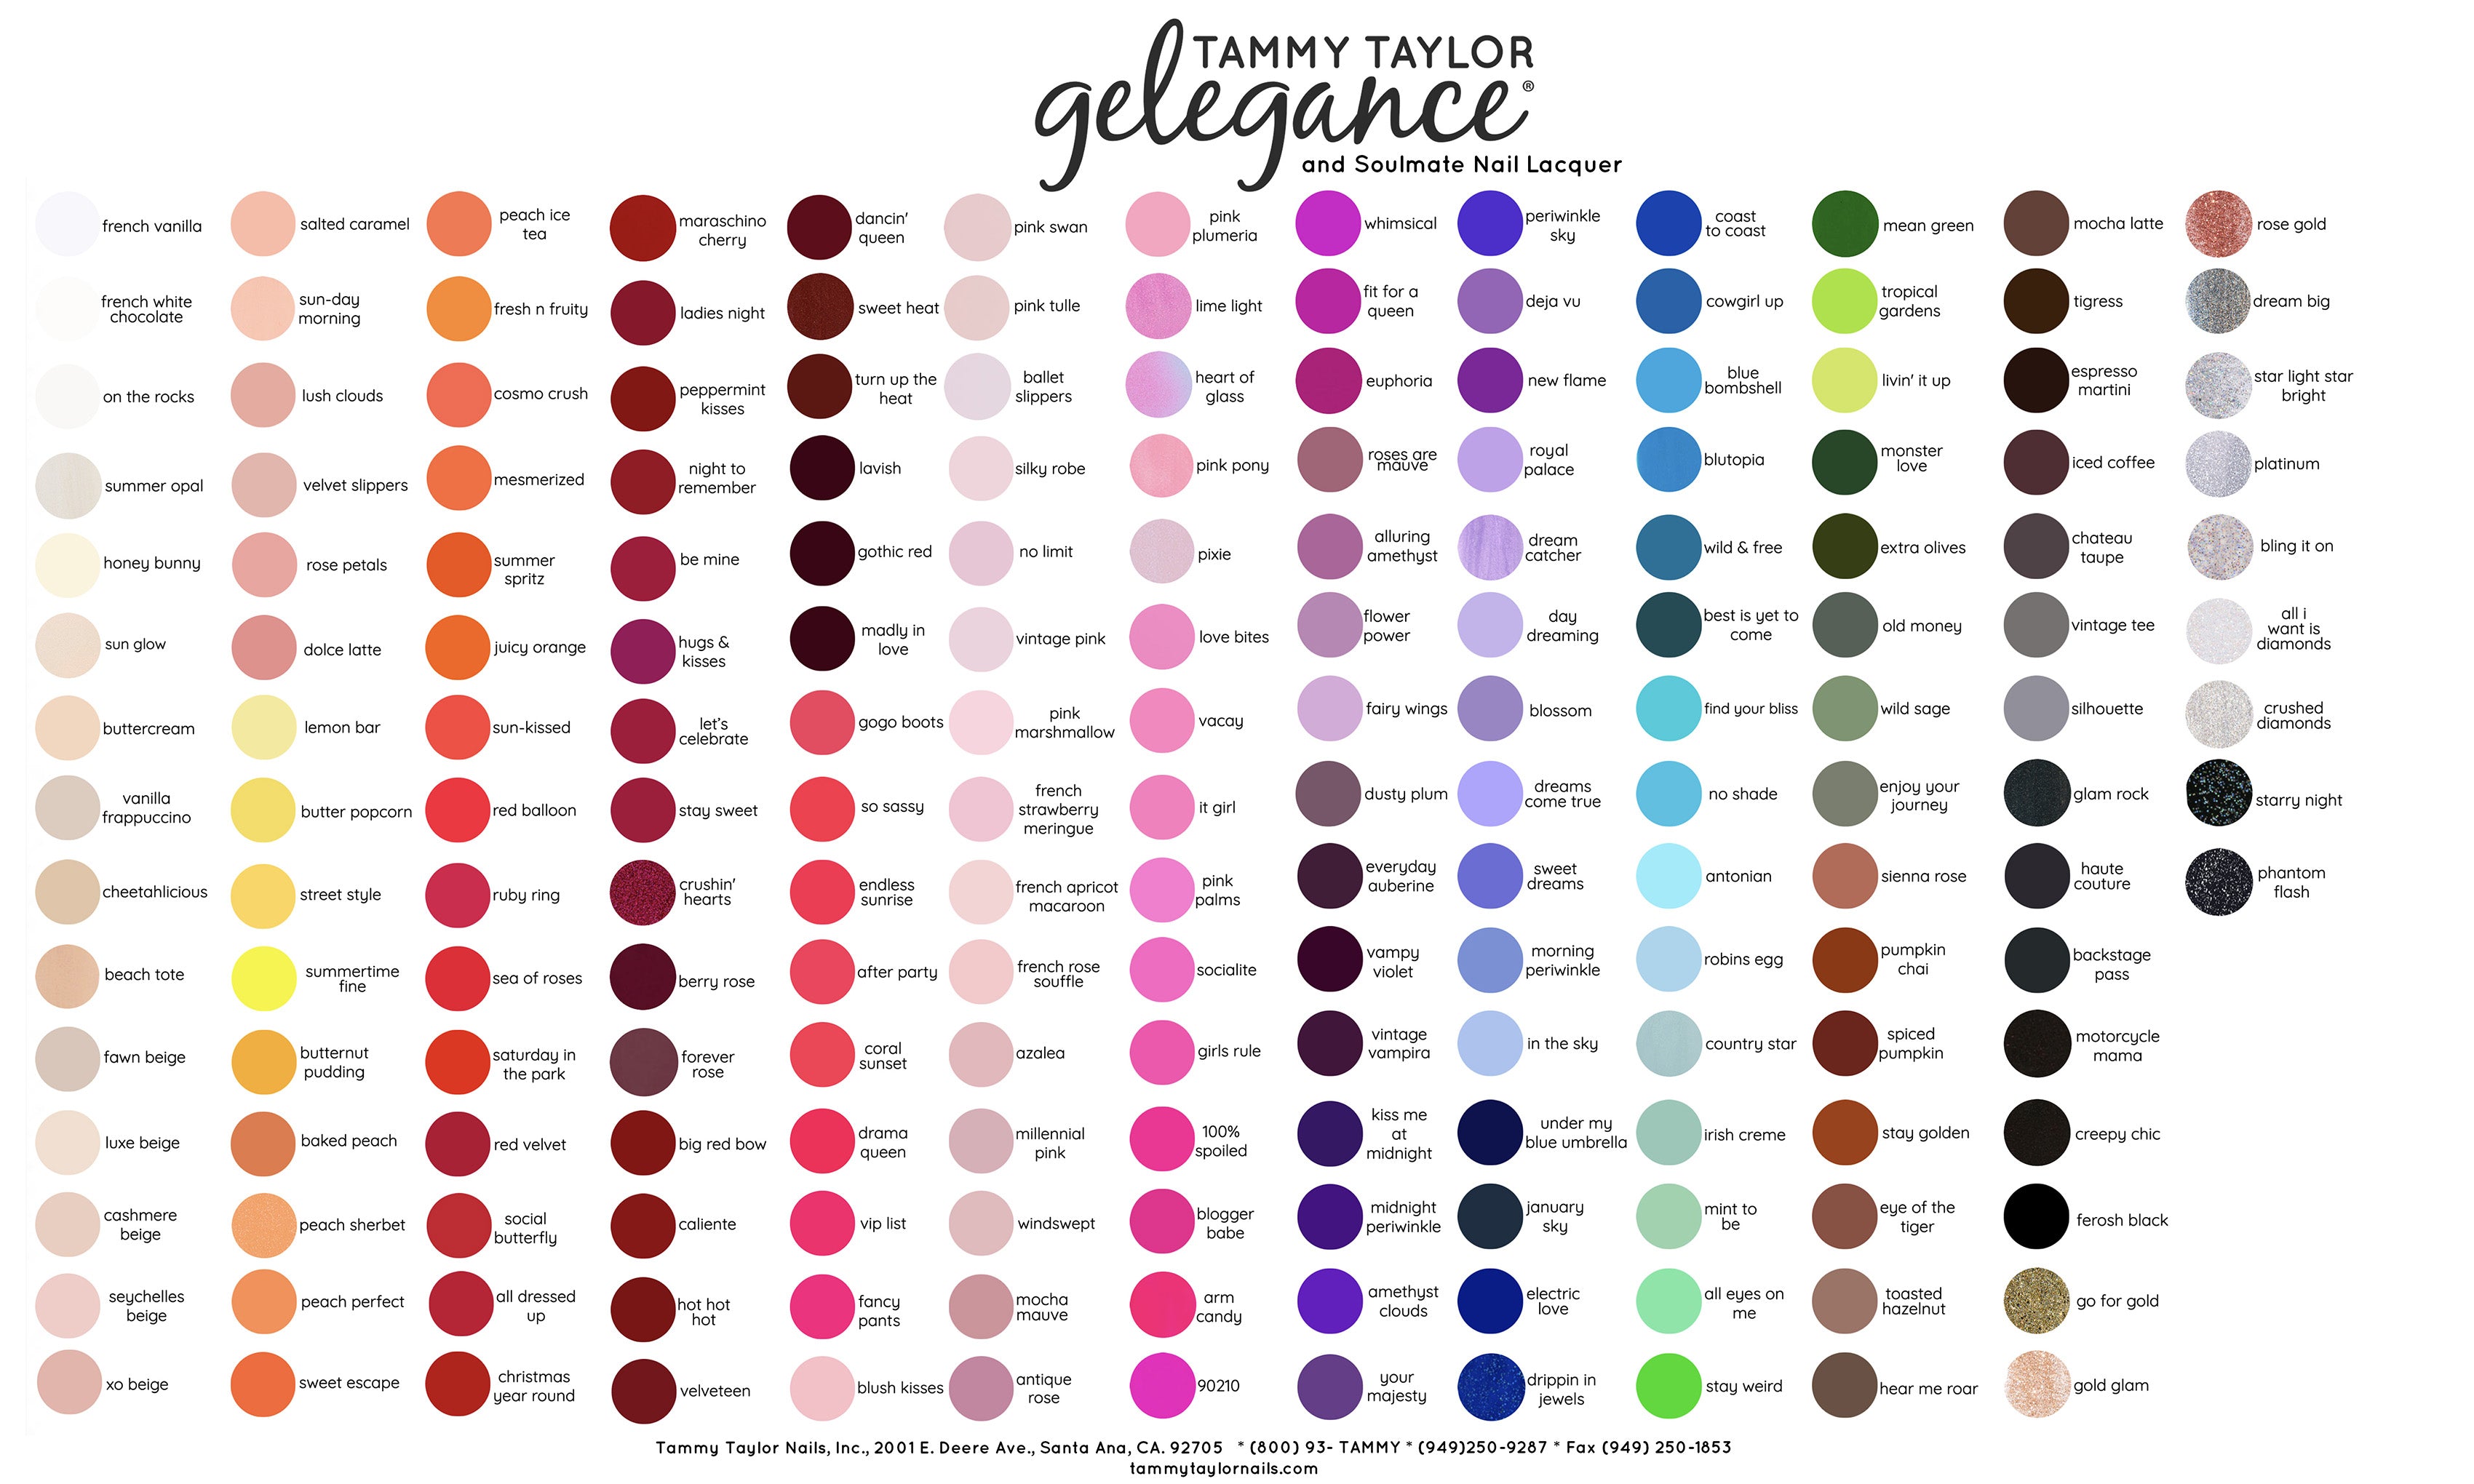 tammy taylor nails gelegance gel polish and soulmate nail lacquer color chart swatches